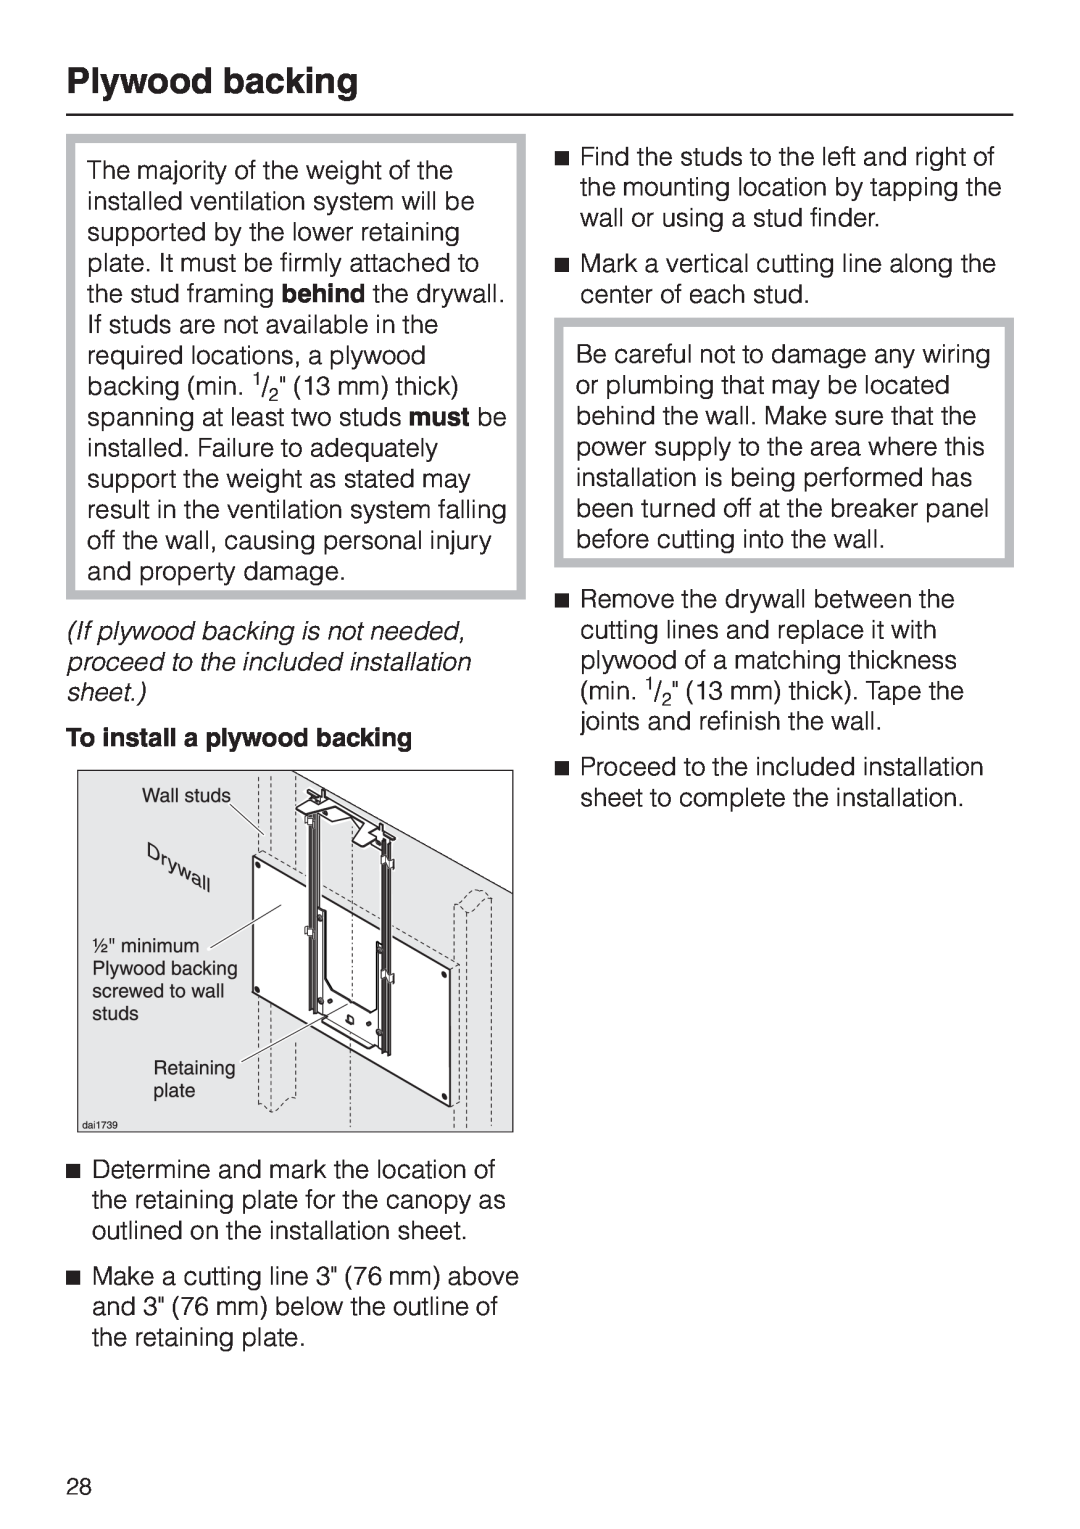 Miele DA 279-4 installation instructions Plywood backing, To install a plywood backing 